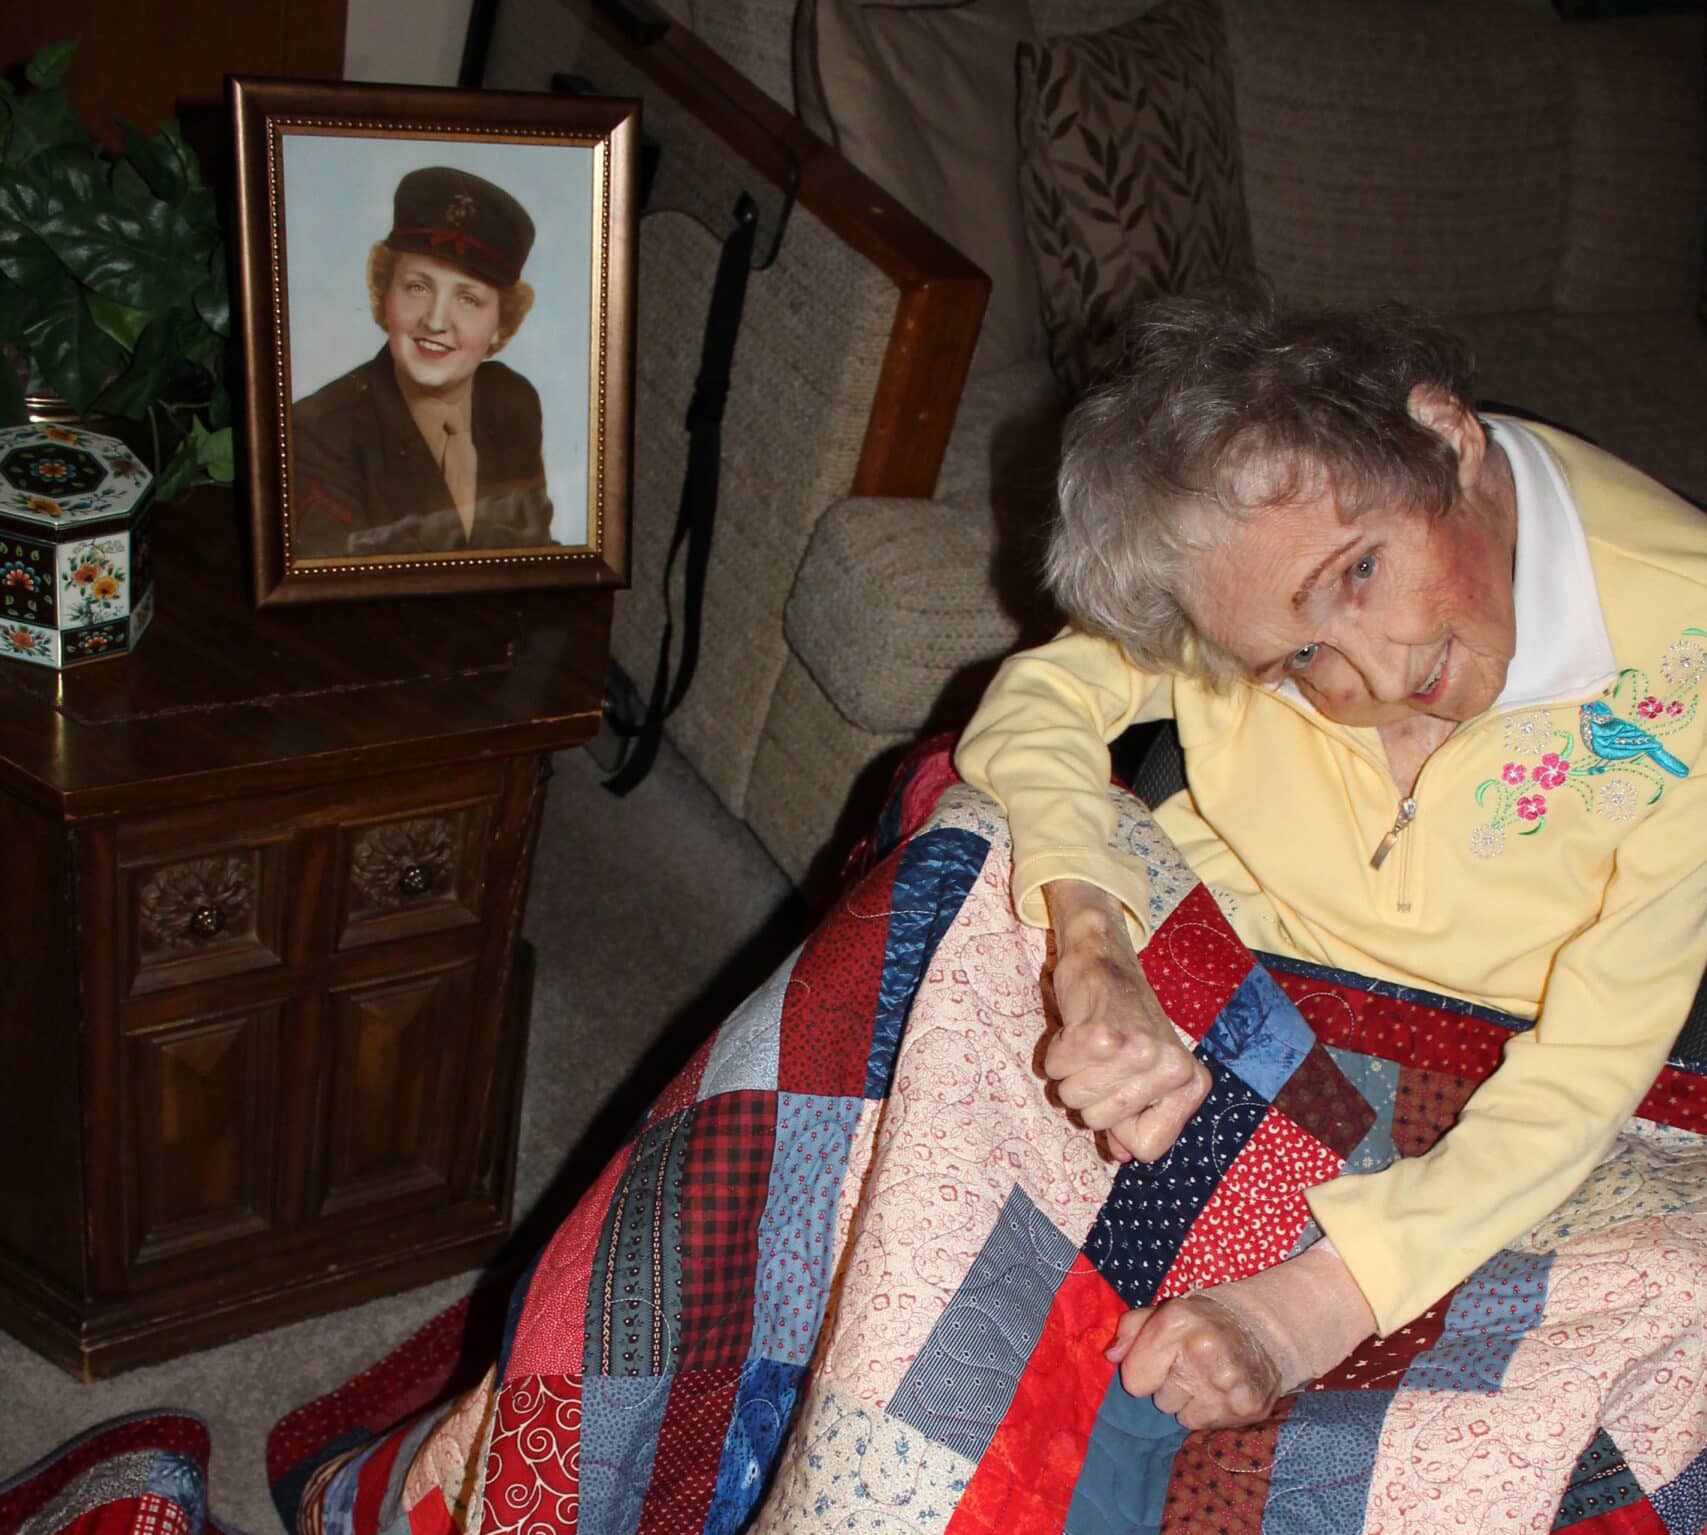 Elderly woman in chair posing next to a young photo of herself